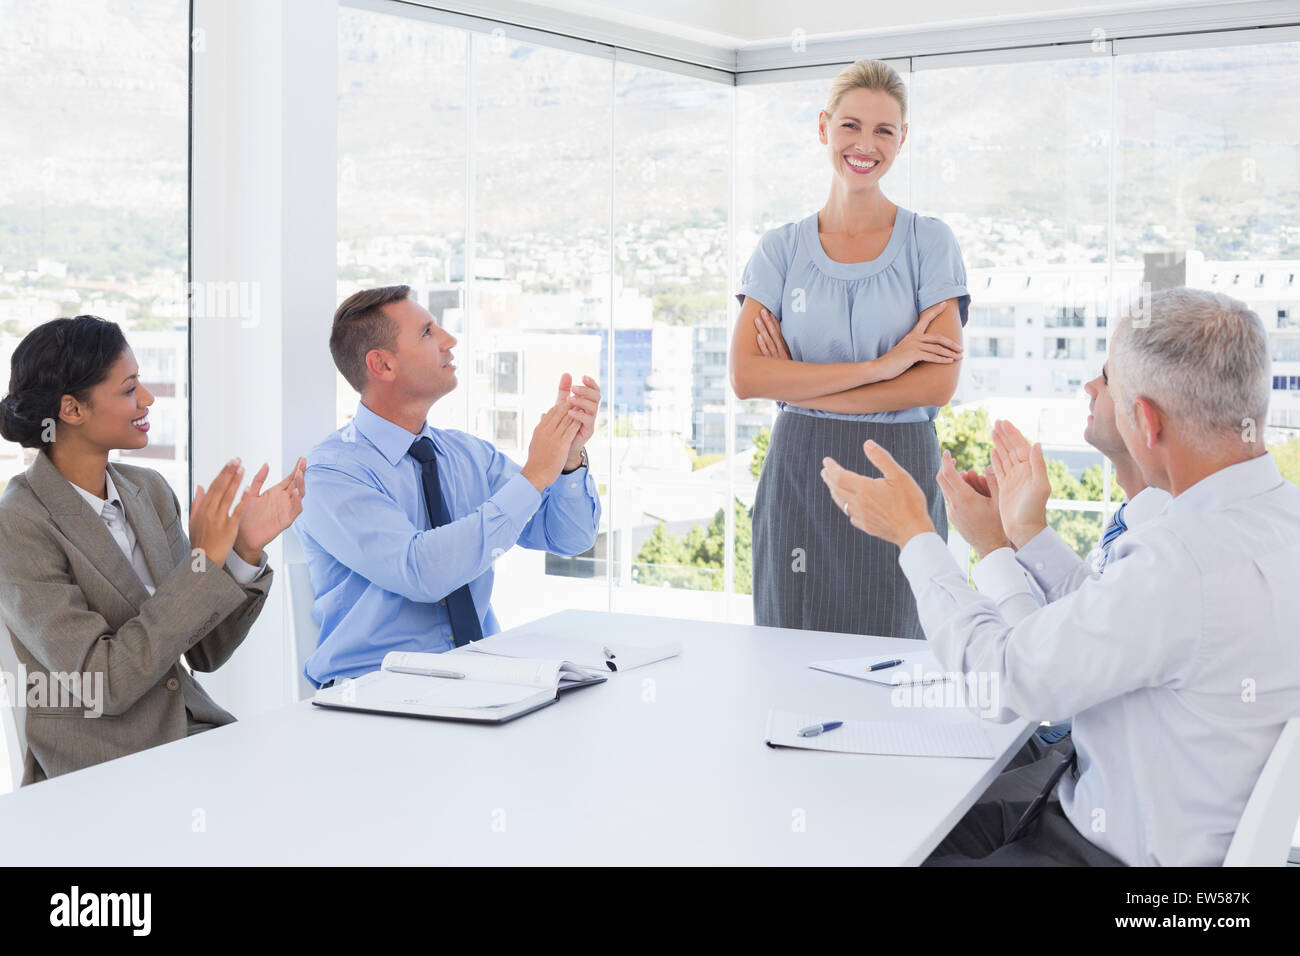 Business team applauding their colleague Stock Photo